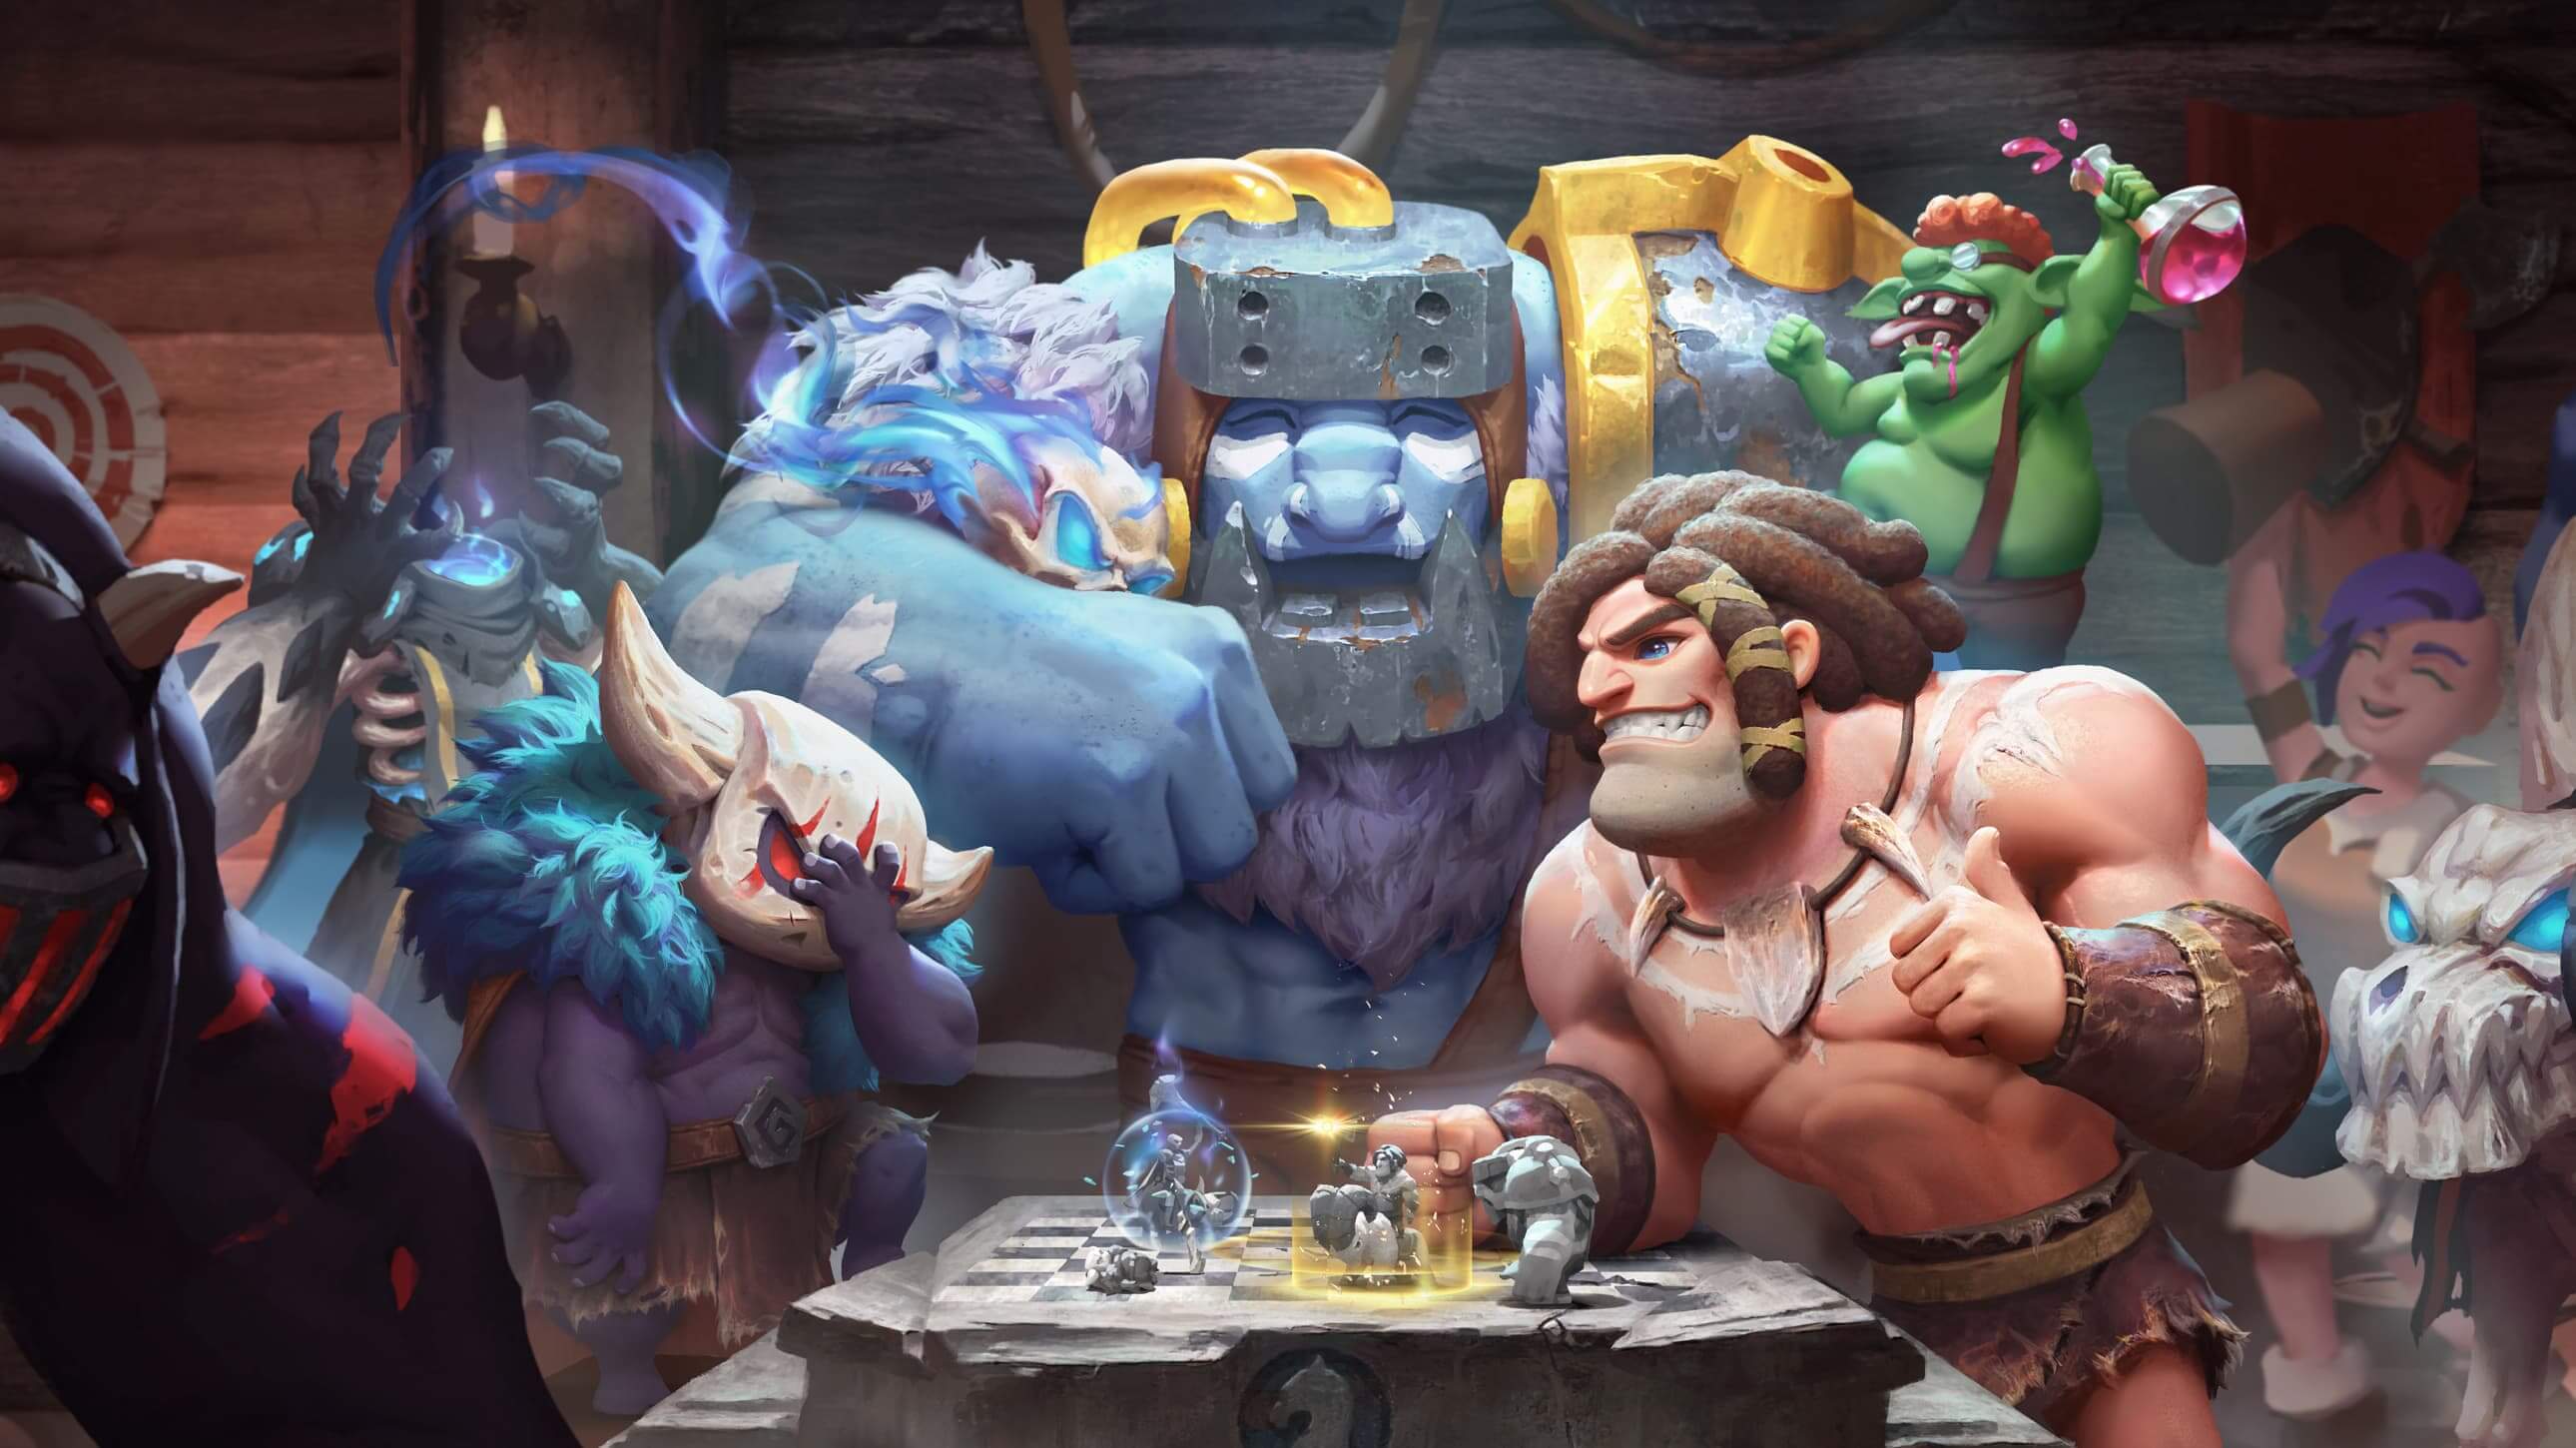 Teamfight Tactics vs. Dota Underlords vs. Auto Chess: Which you should play